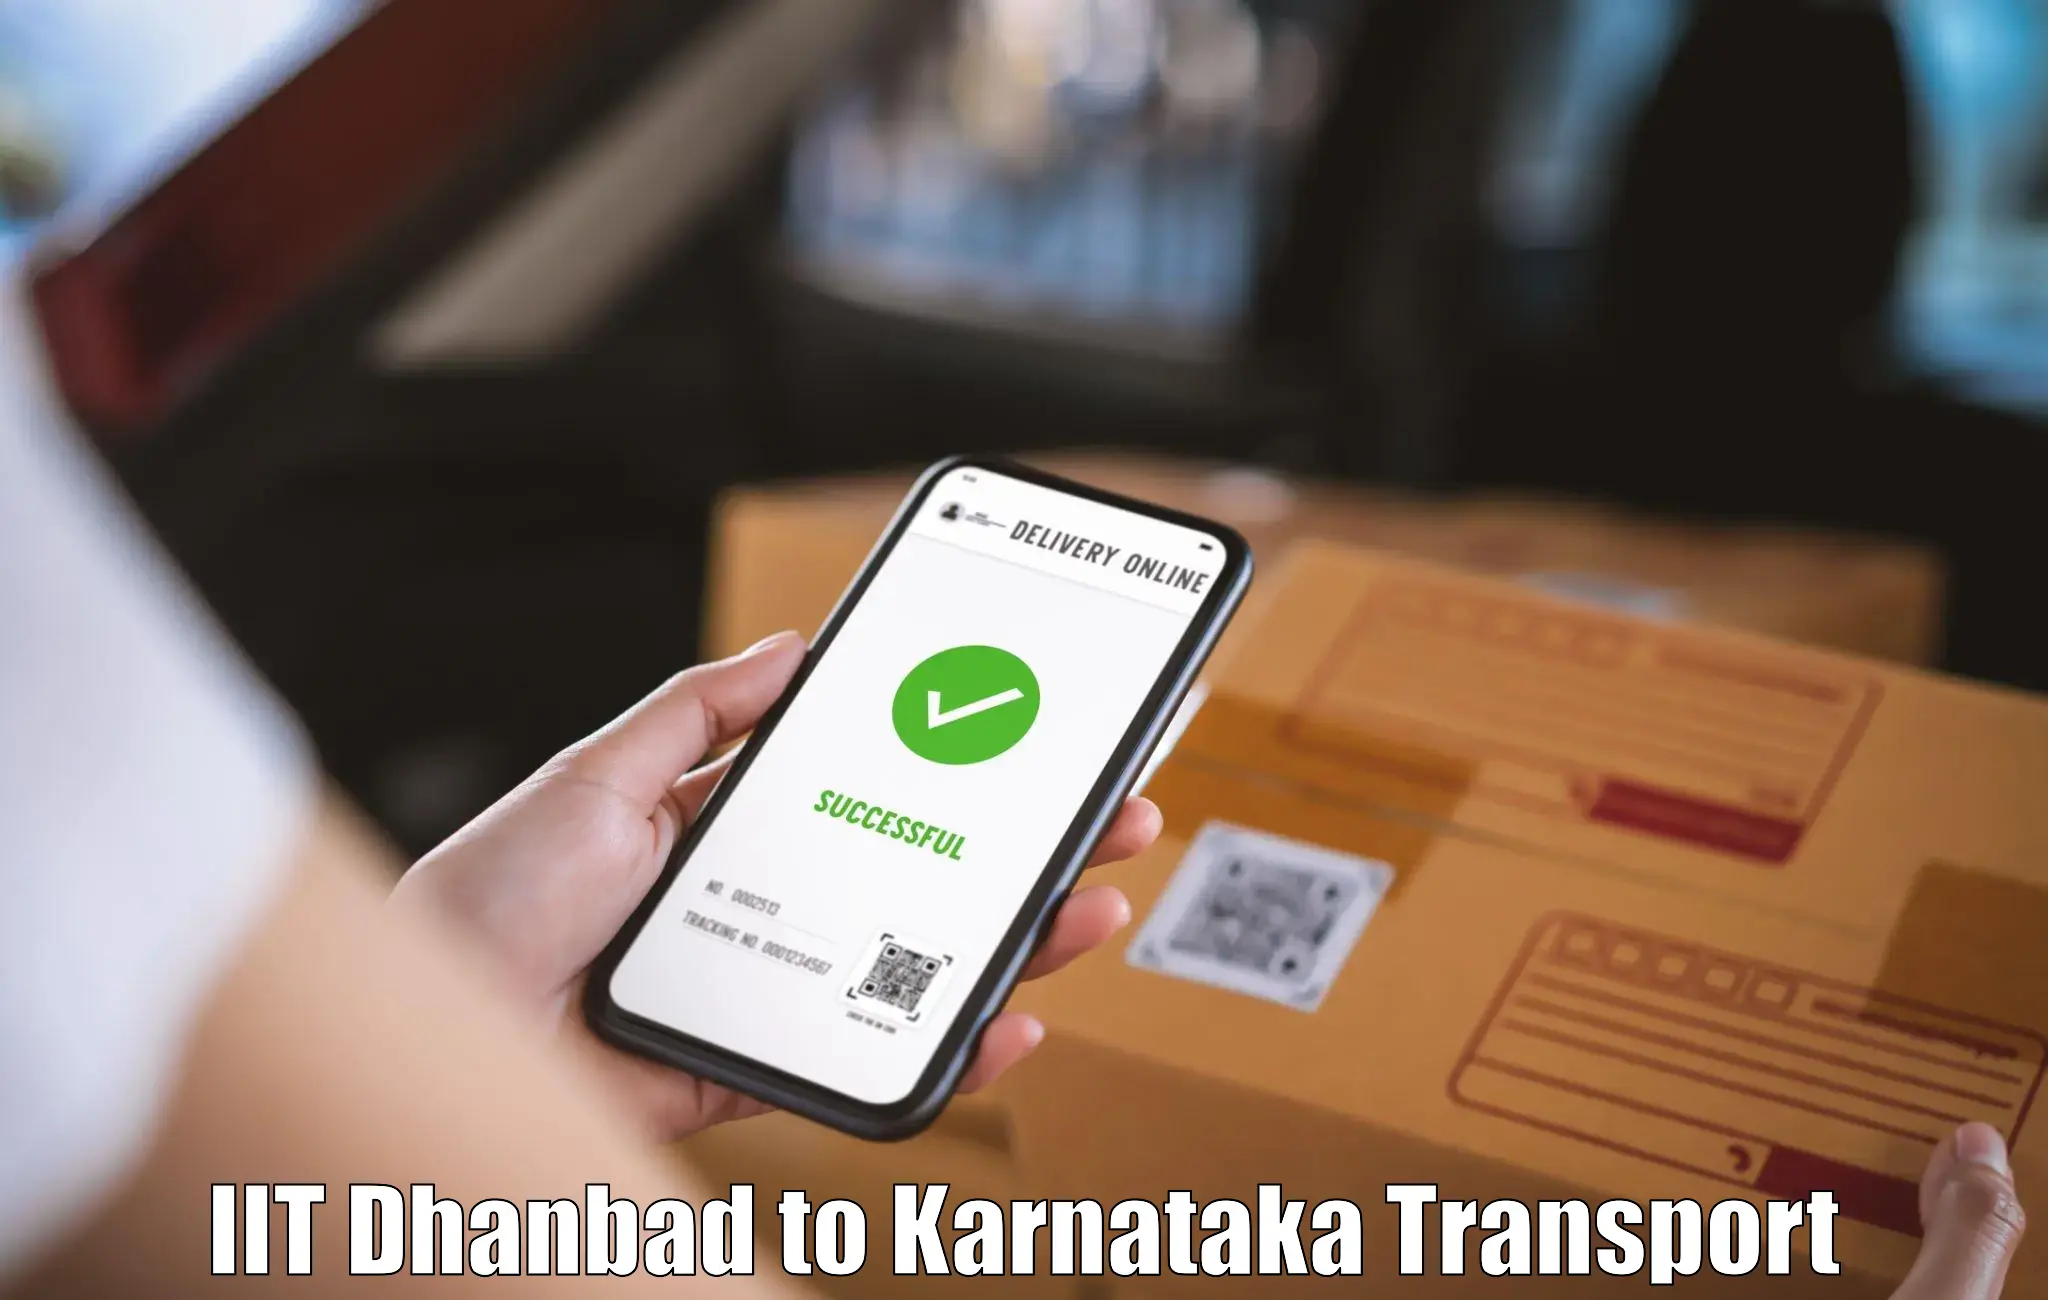 Pick up transport service IIT Dhanbad to Kollegal